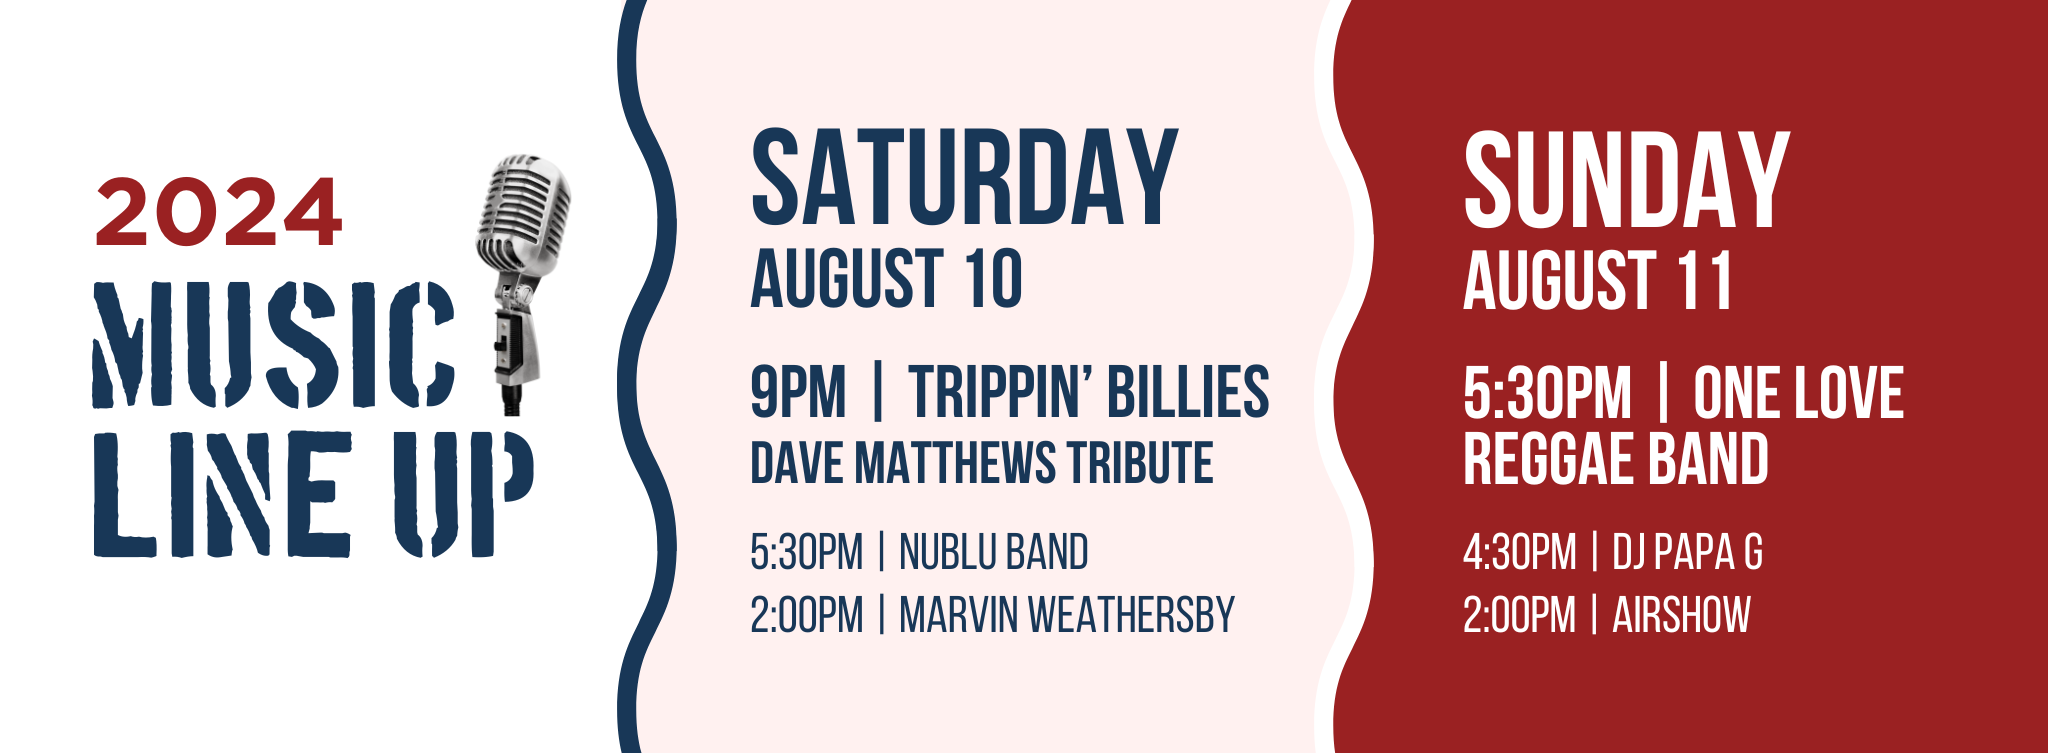 Saturday, August 10 2-4:30PM Marvin Weathersby 5:30-8PM NuBlu Band (Blues) 9-11:10PM Trippin' Billies (Cover - Dave Matthews Tribute) Sunday, August 11 2-4:30PM Airshow 4:30PM & 6:30PM DJ Papa G 5:30PM & 7:00PM One Love Reggae Band